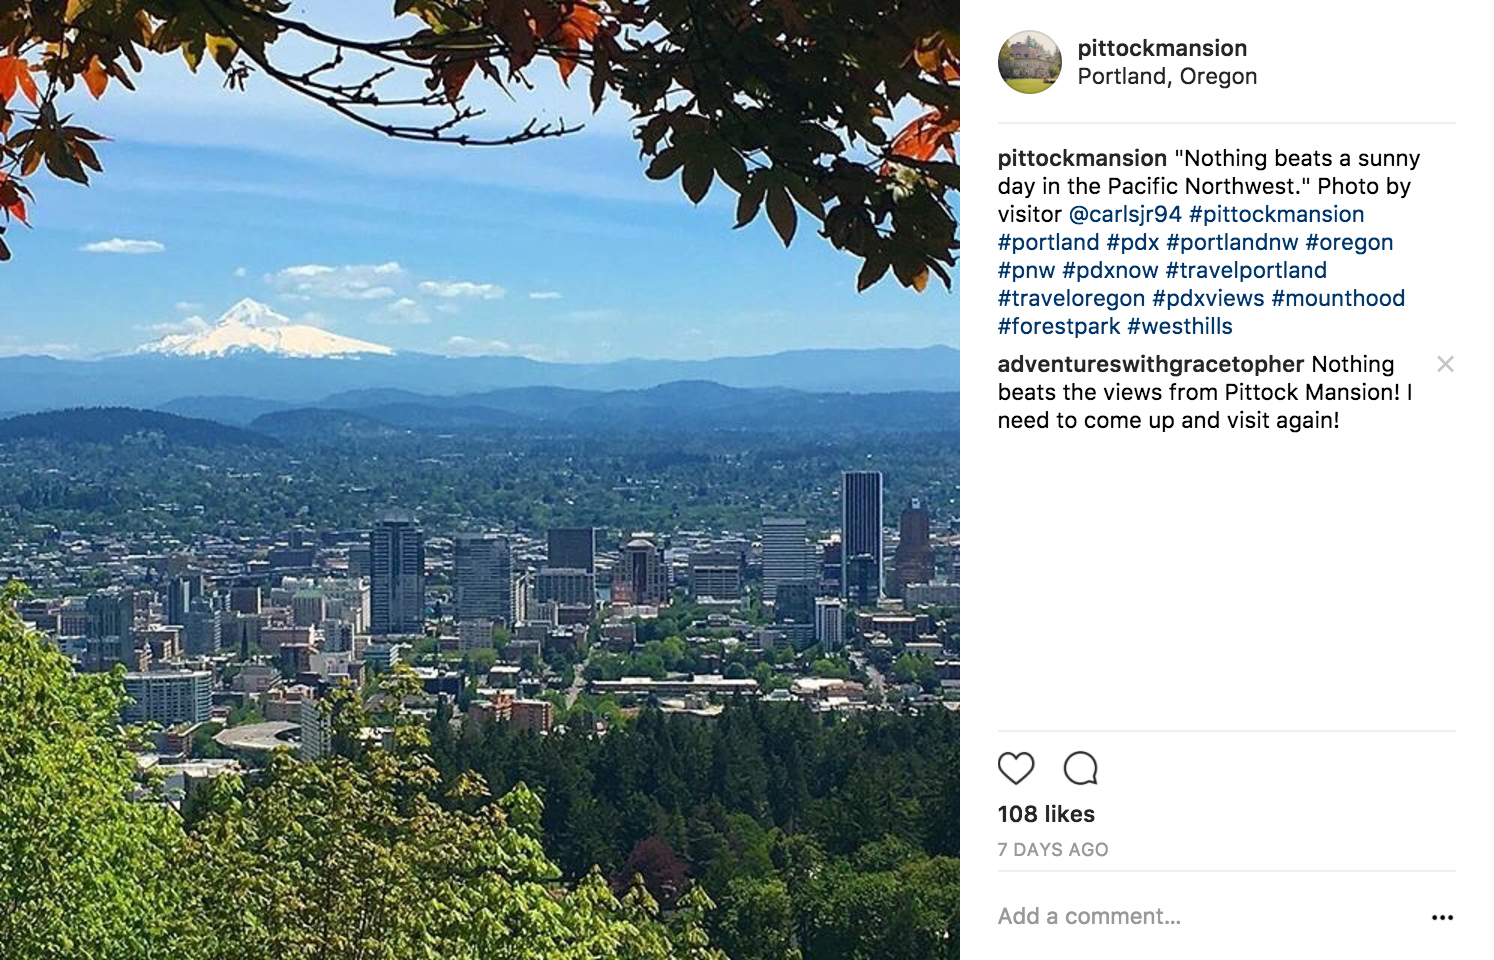 Click image to visit Pittock Mansion's Instagram page.